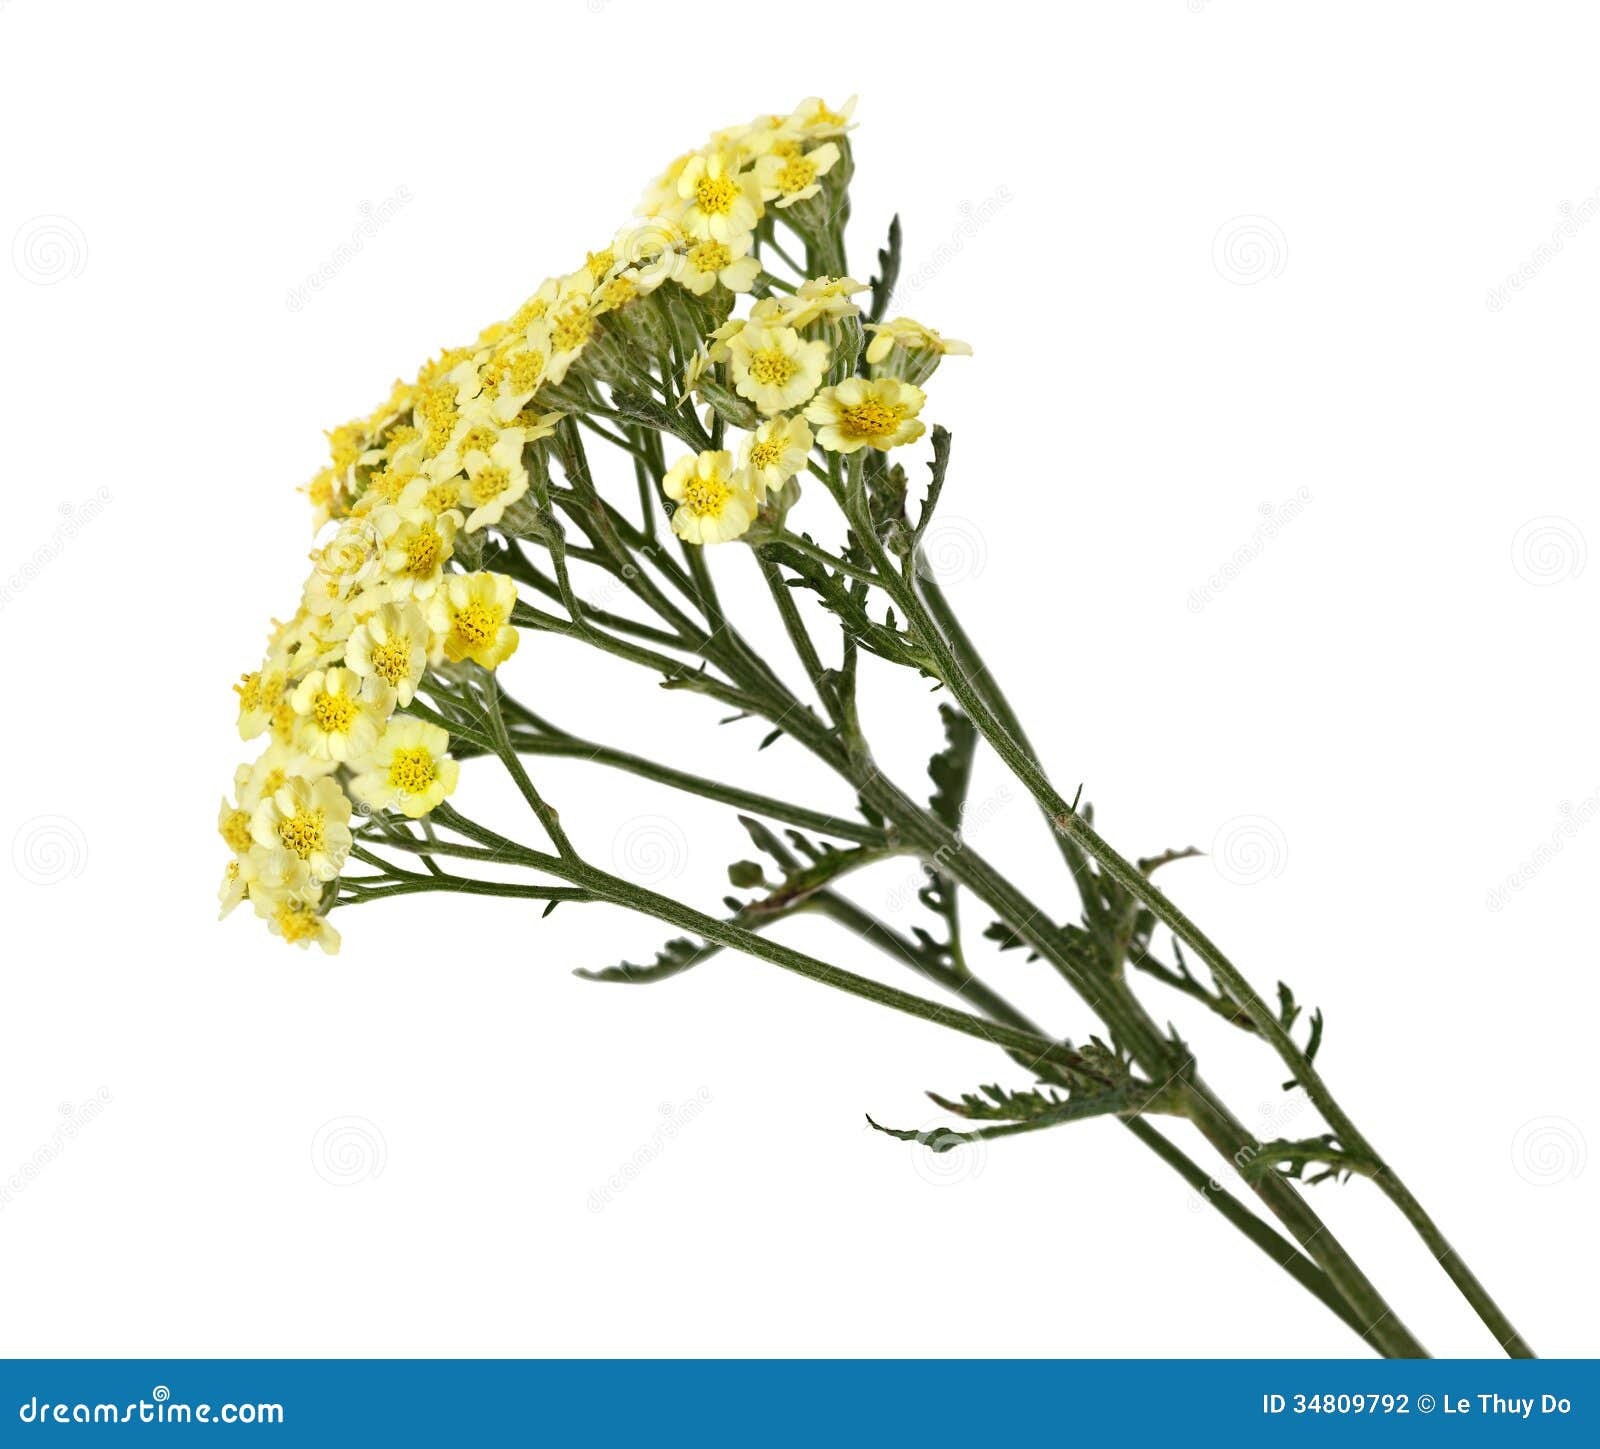 Common Yarrow Flower Stock Photo Image Of Flower Asteraceae 34809792